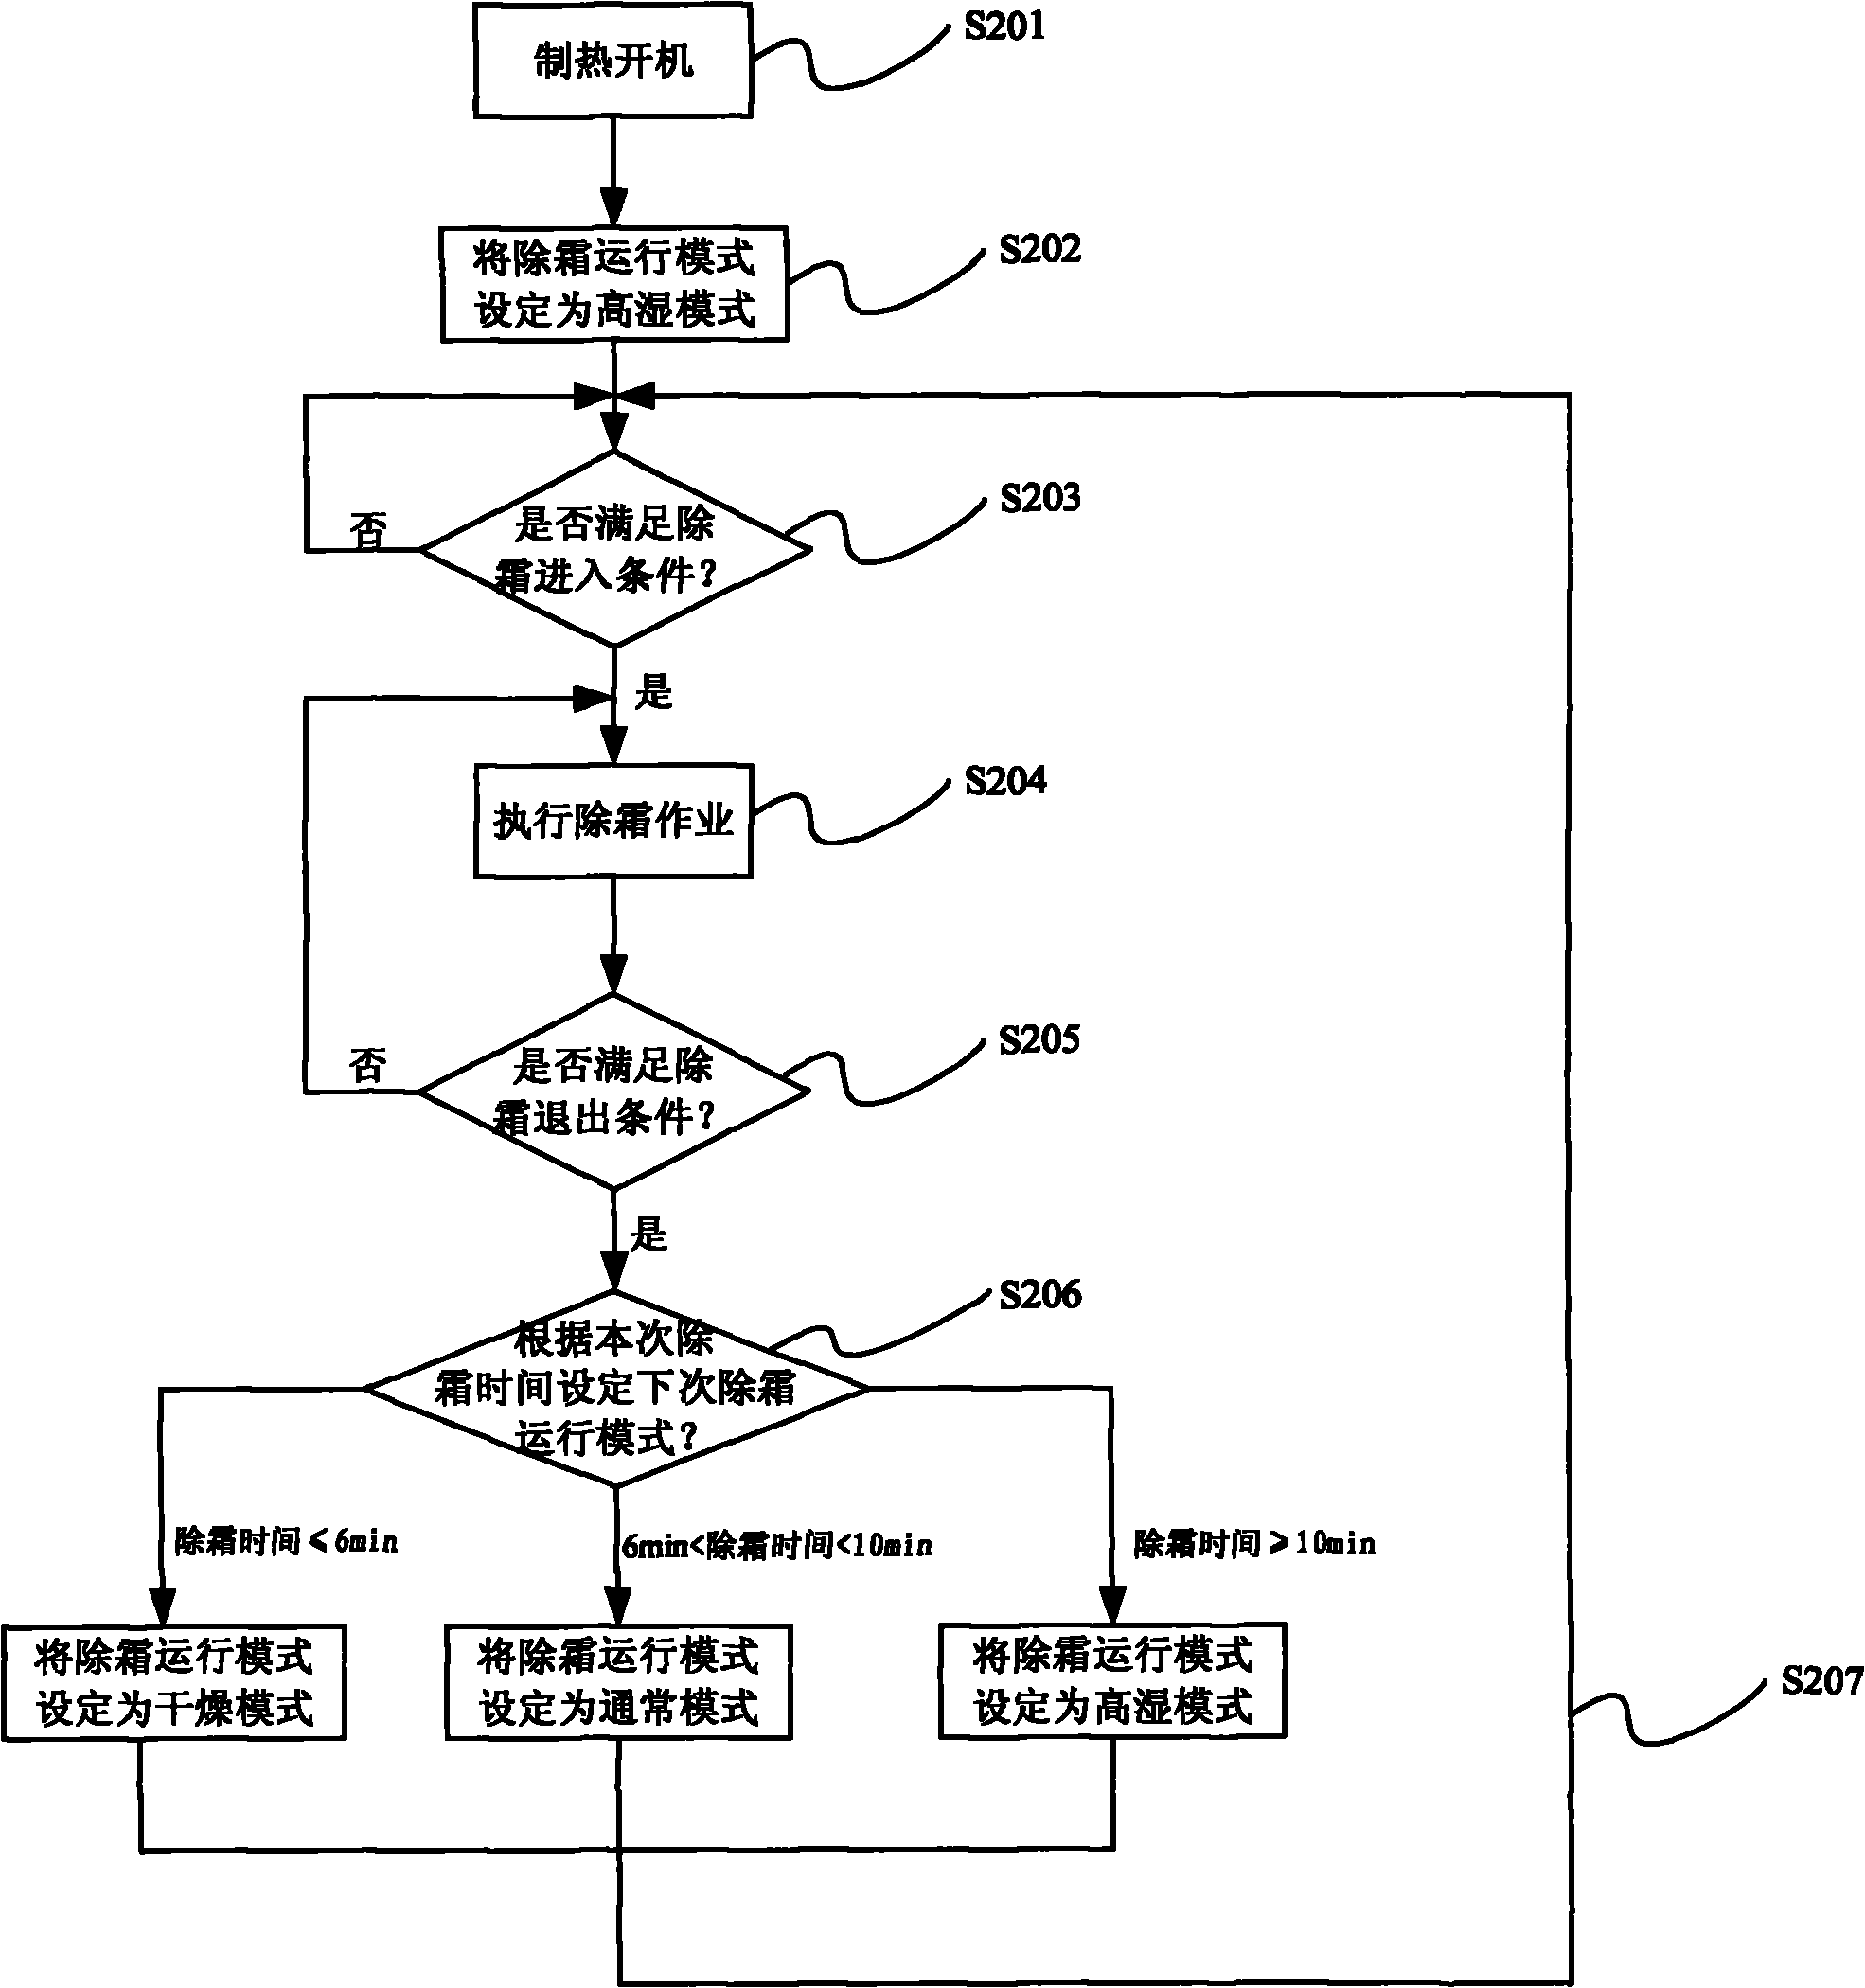 Defrosting control method for air-conditioning system